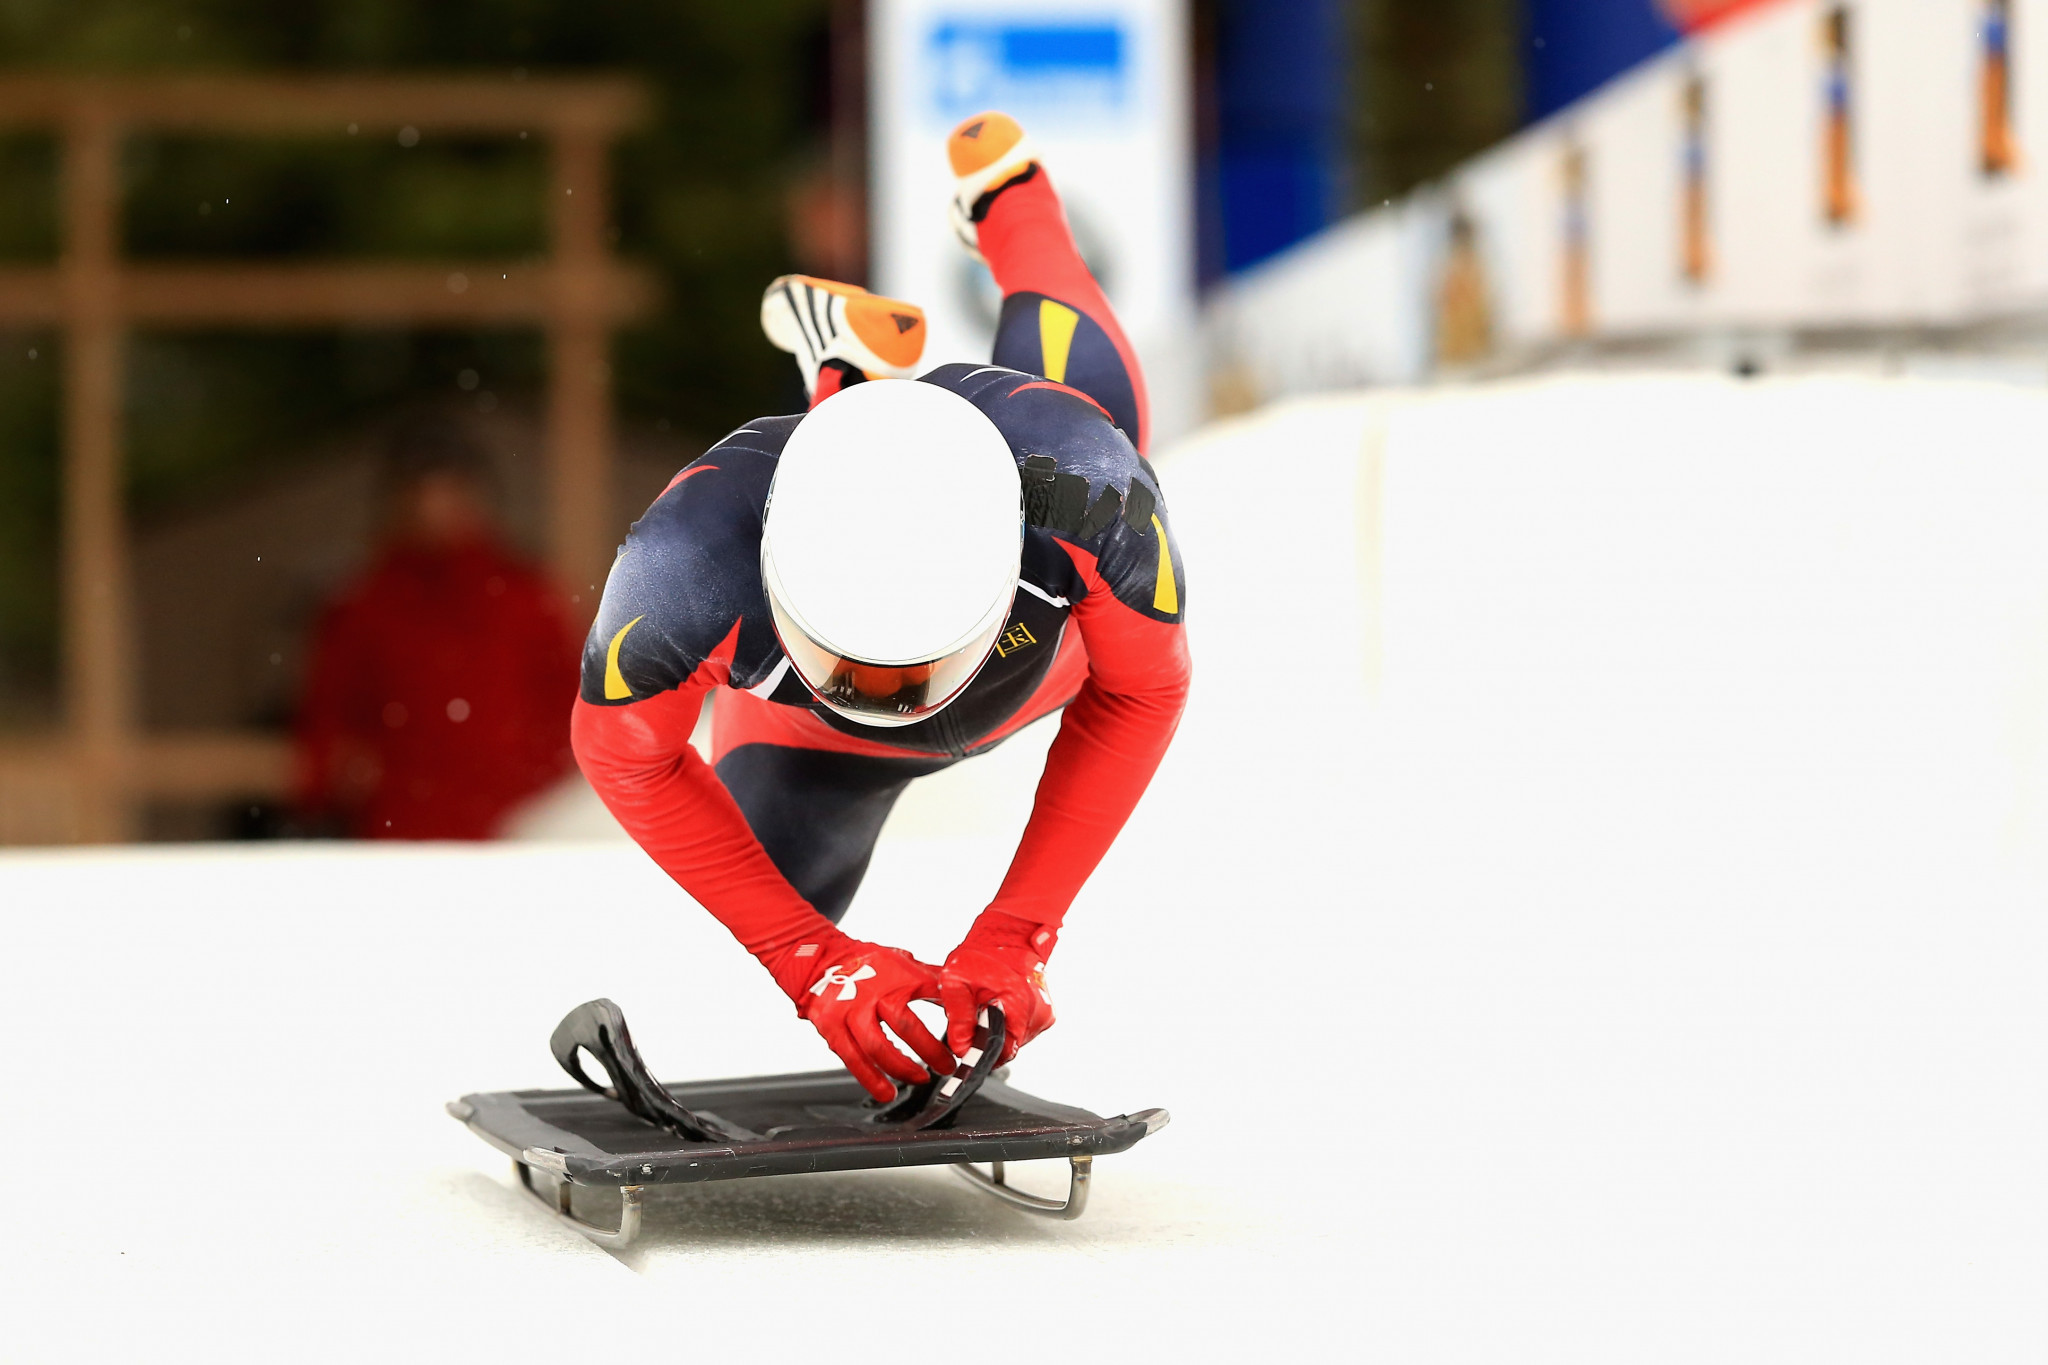 Geng Wenqiang will compete for China at skeleton at Pyeongchang 2018 ©Getty Images